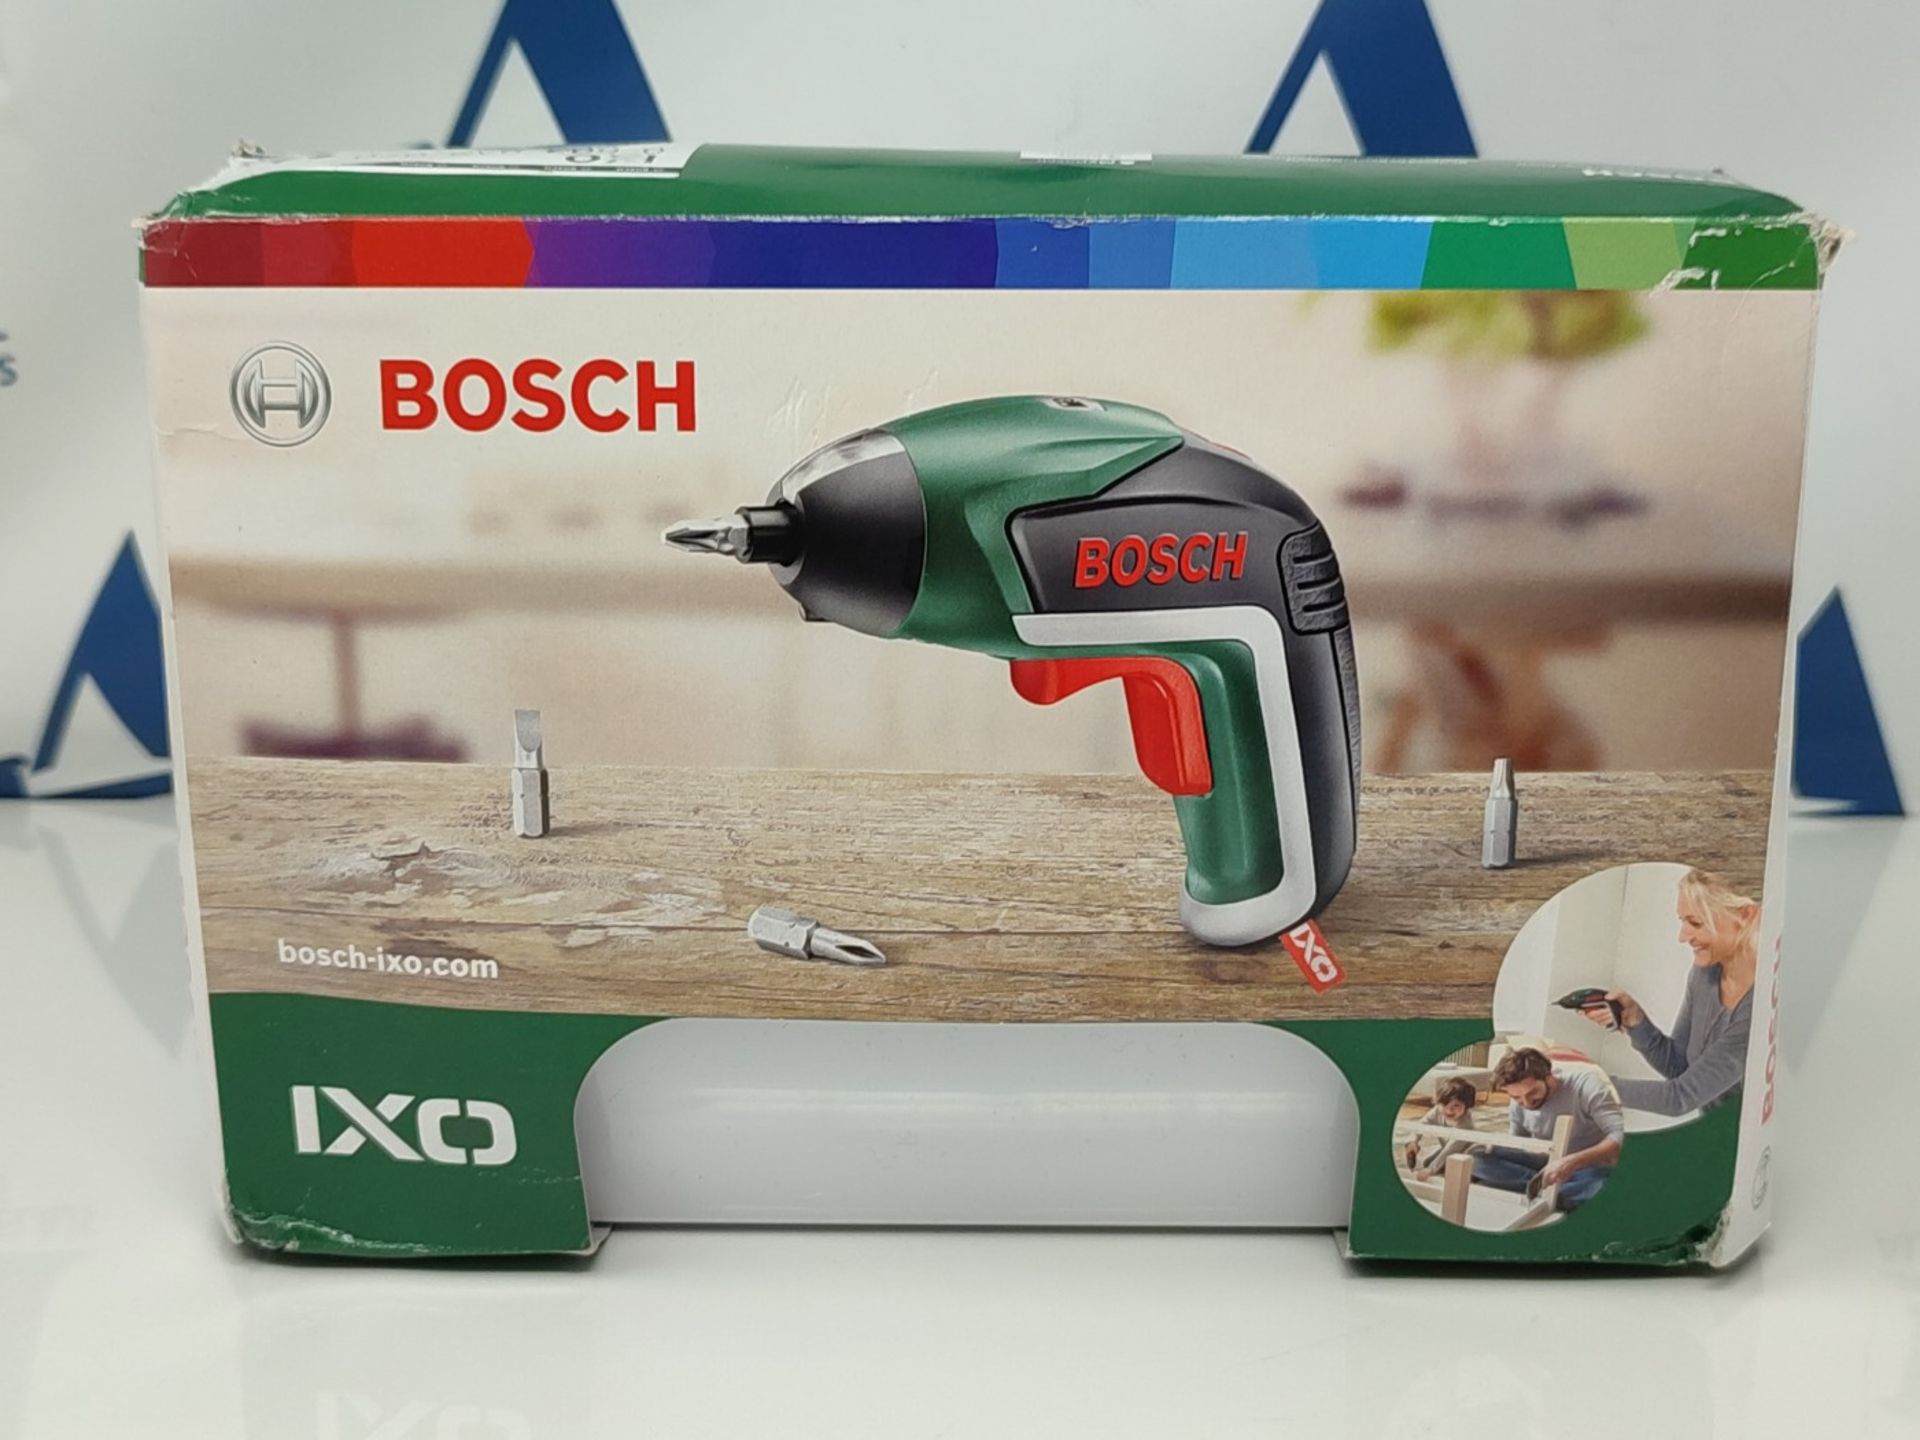 Bosch Home and Garden Cordless Screwdriver IXO (5th generation, 3.6 V, in case) - Image 2 of 3